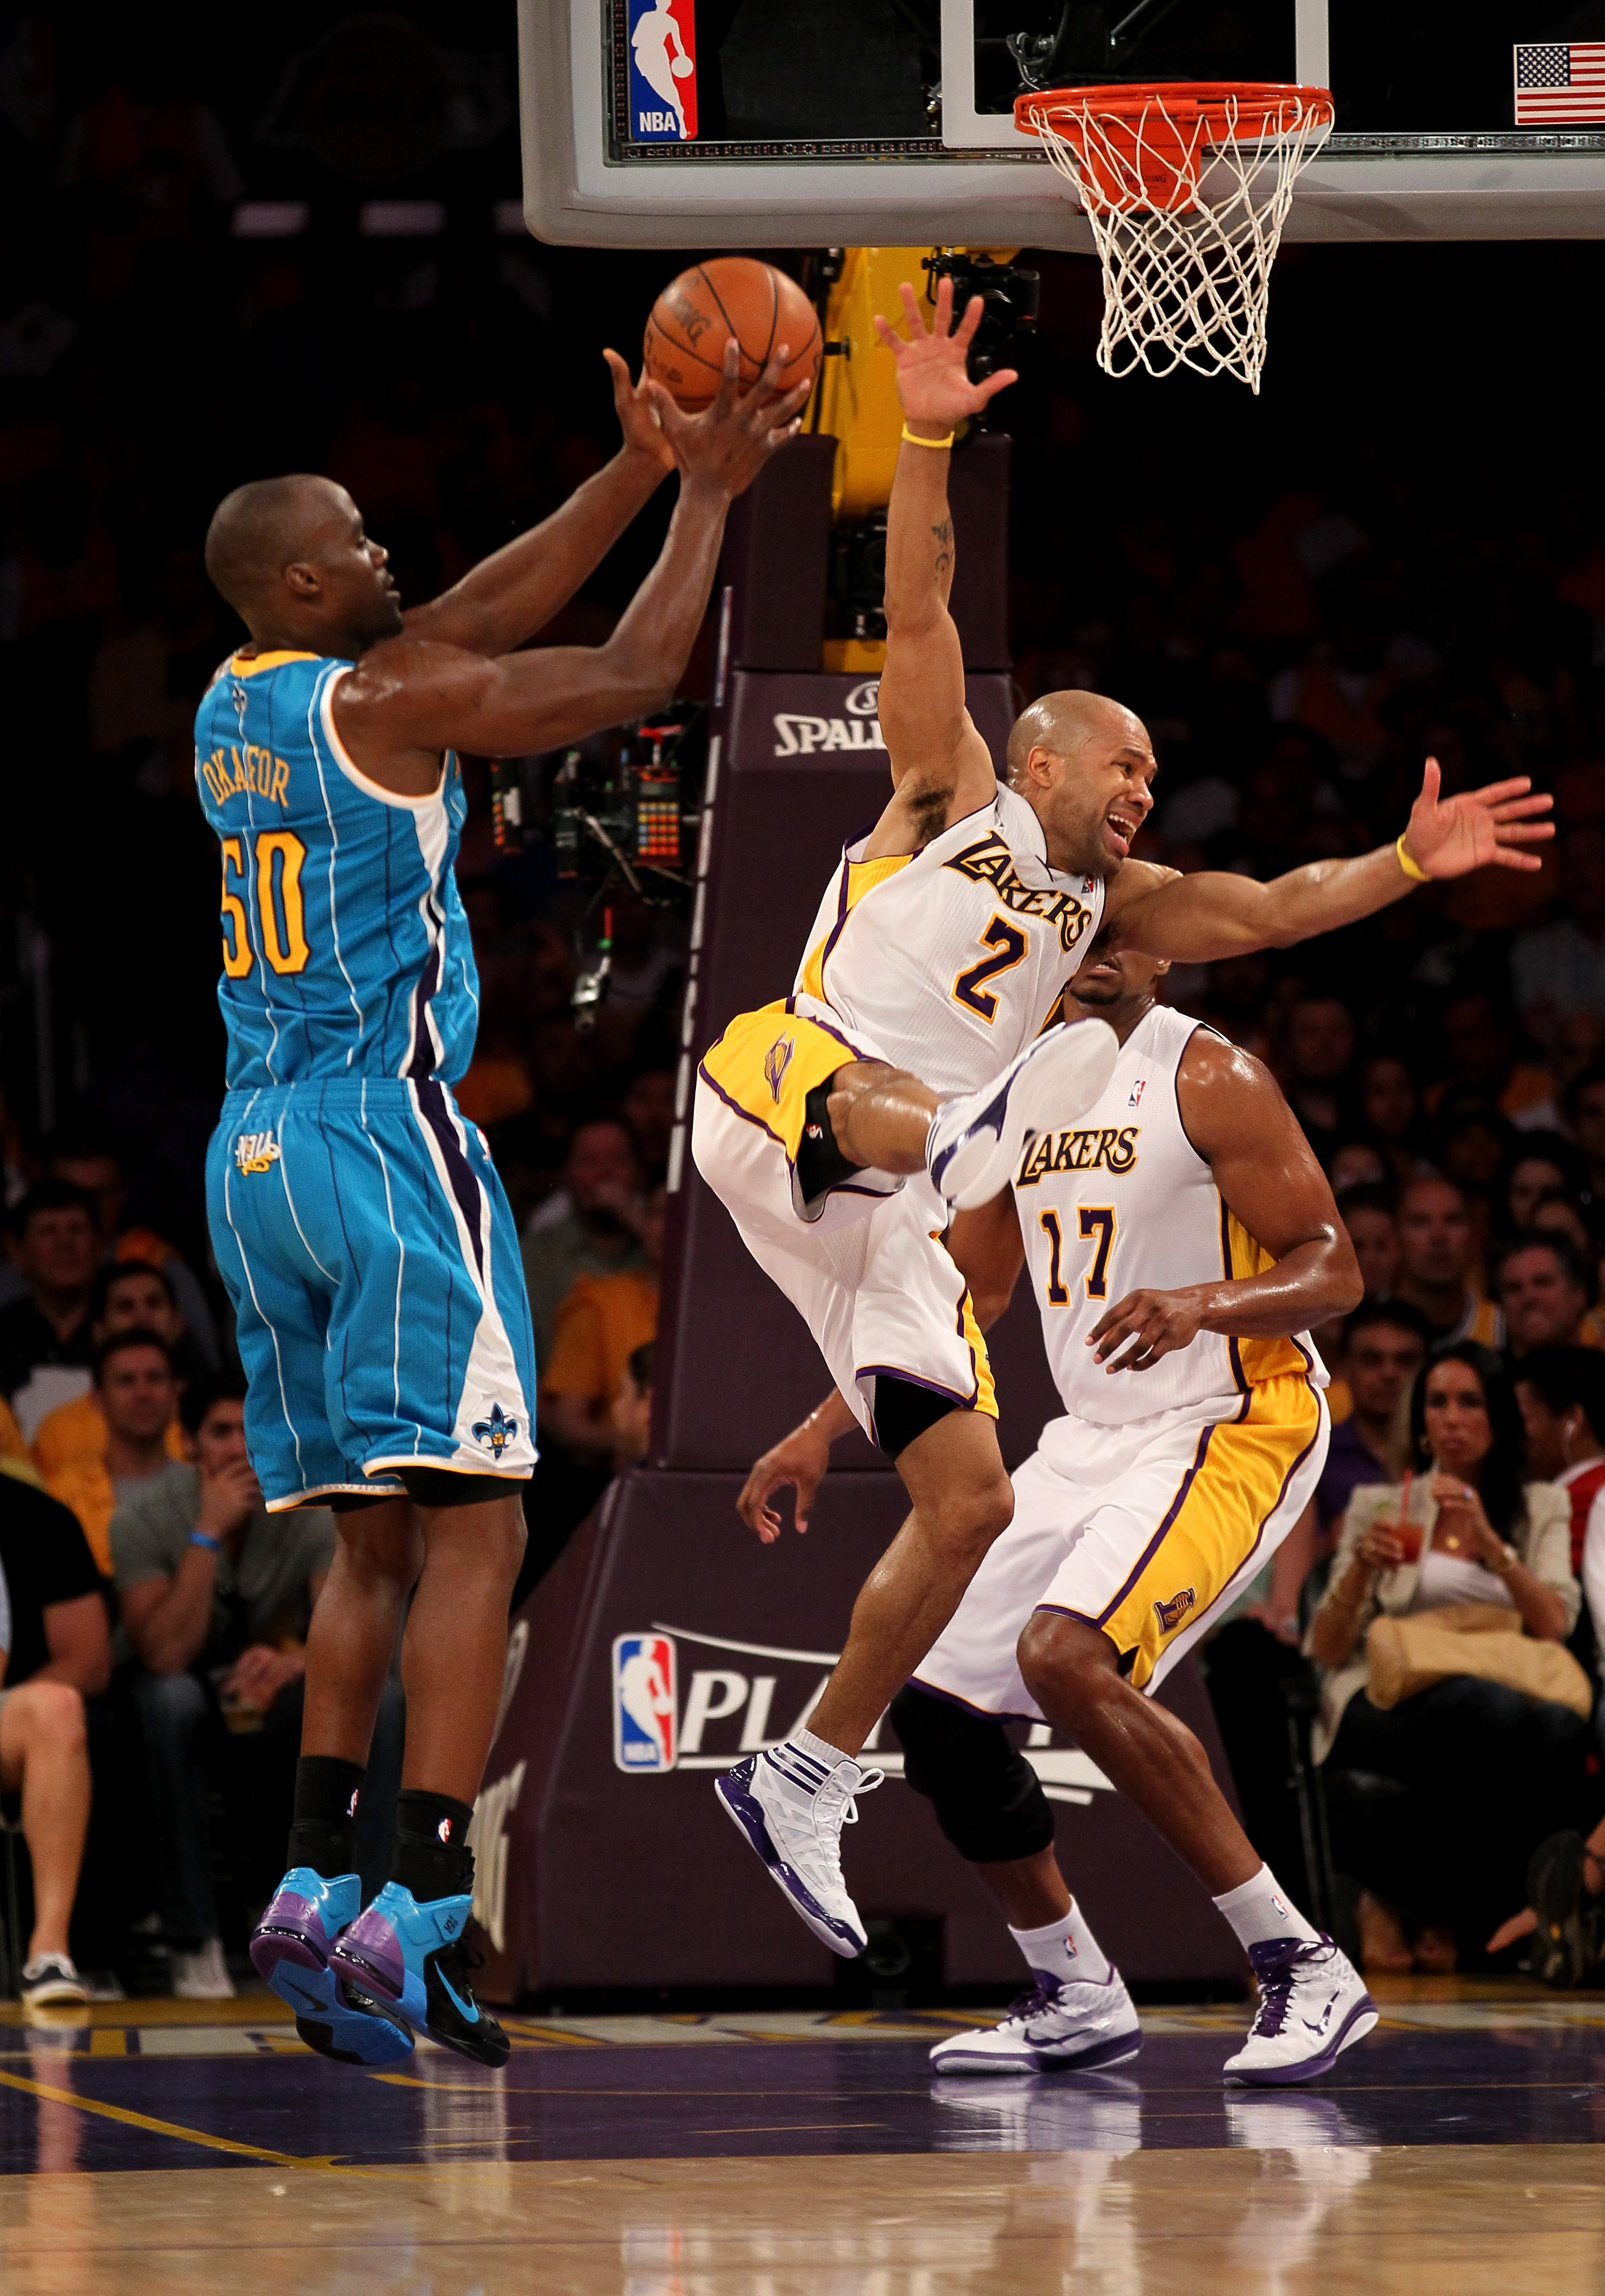 LOS ANGELES, CA - APRIL 17:   Emeka Okafor #50 of  the New Orleans Hornets controls the ball against Derek Fisher #2 of the Los Angeles Lakers in Game One of the Western Conference Quarterfinals in the 2011 NBA Playoffs on April 17, 2011 at Staples Center